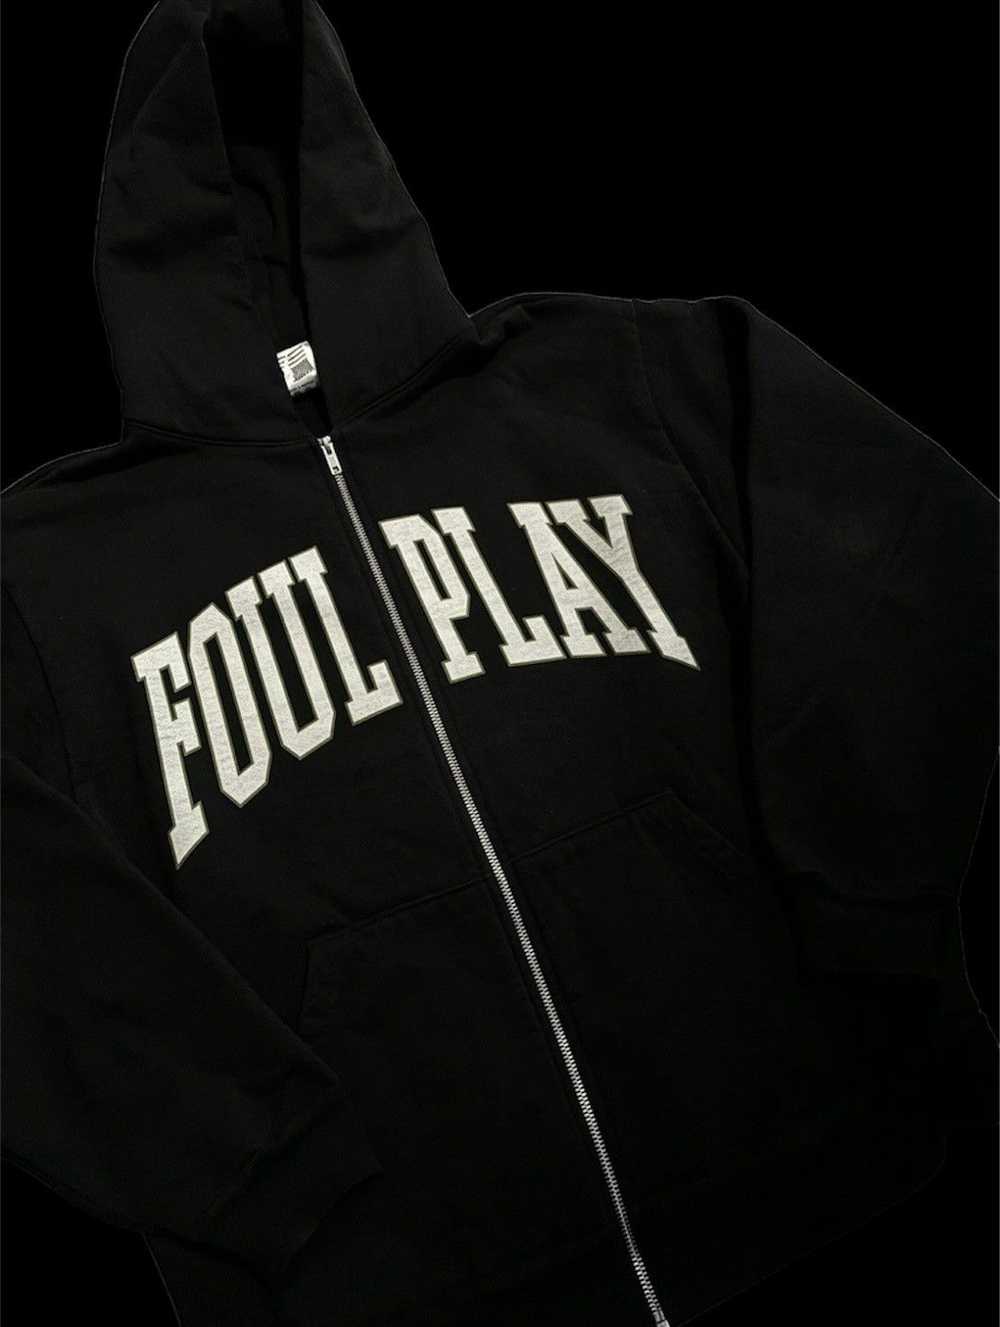 Foulplay Company Foulplay zip - image 1